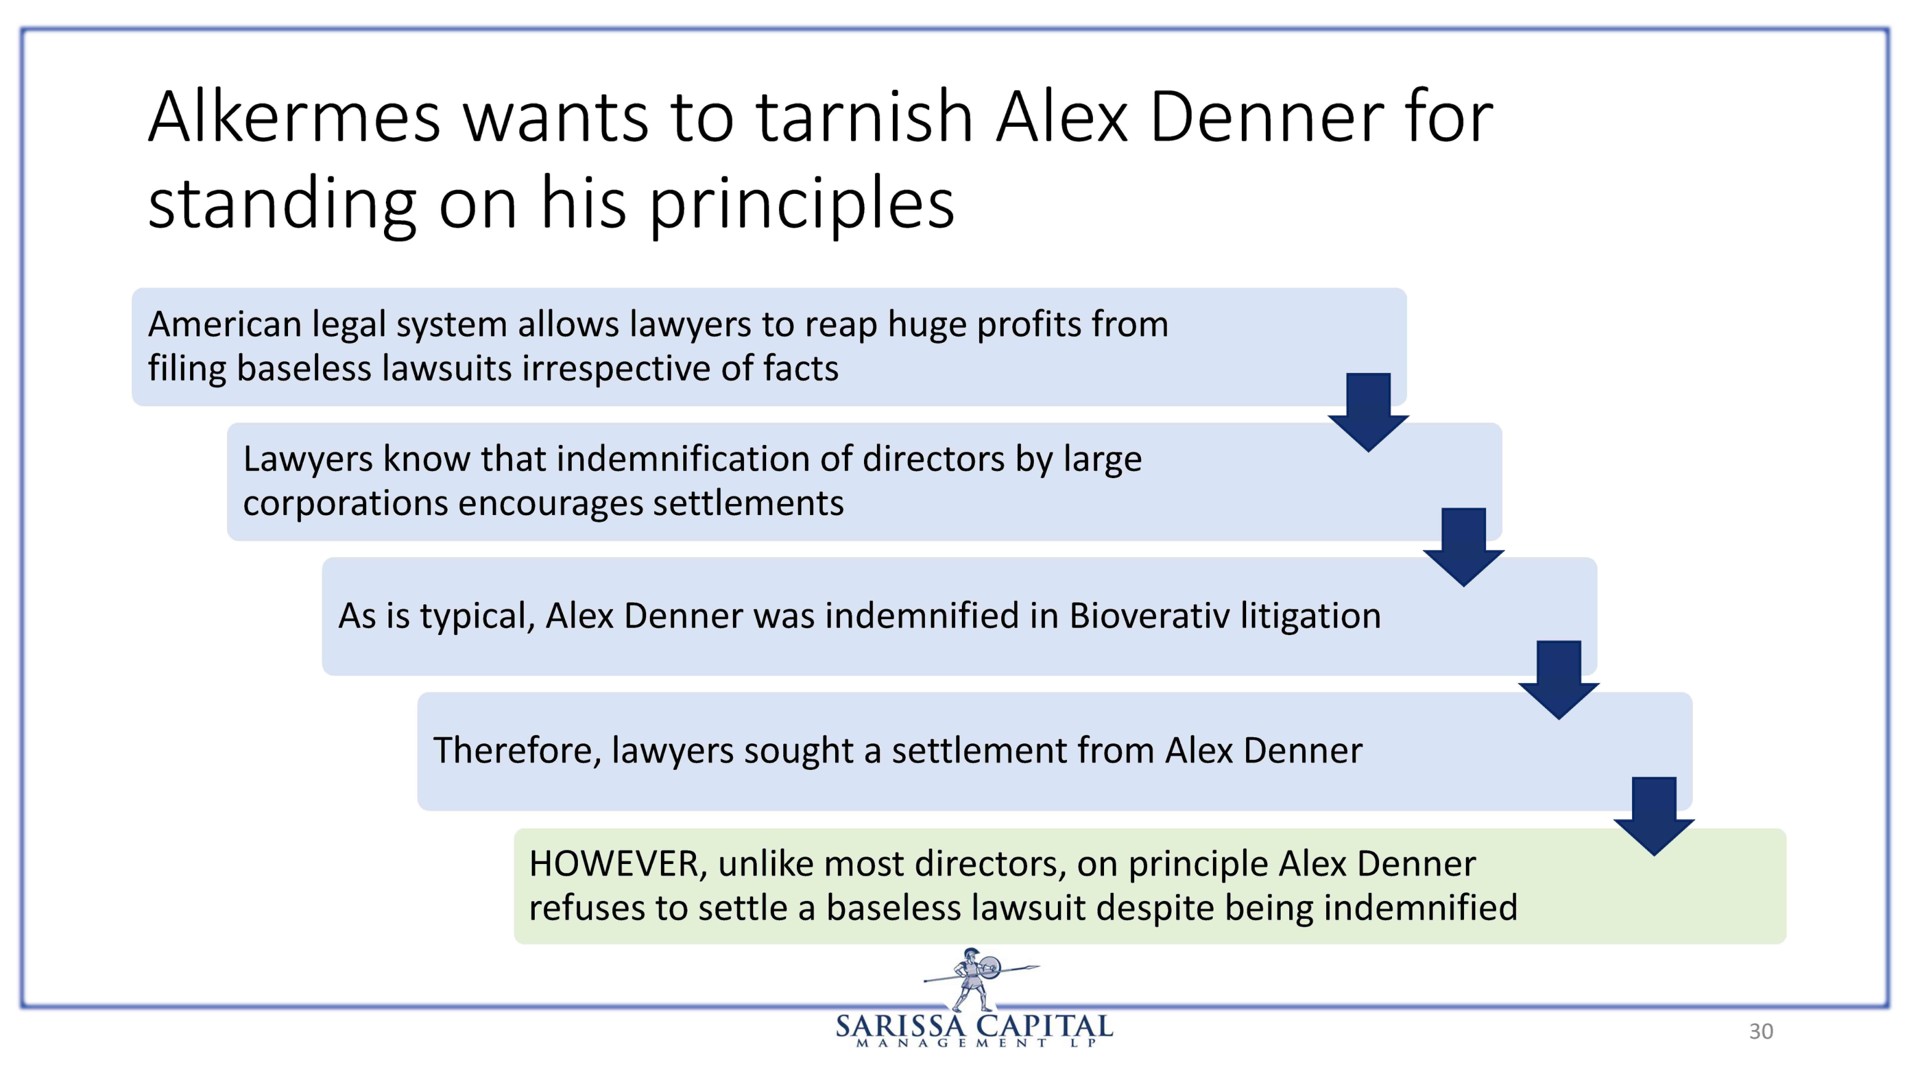 alkermes wants to tarnish for standing on his principles | Sarissa Capital